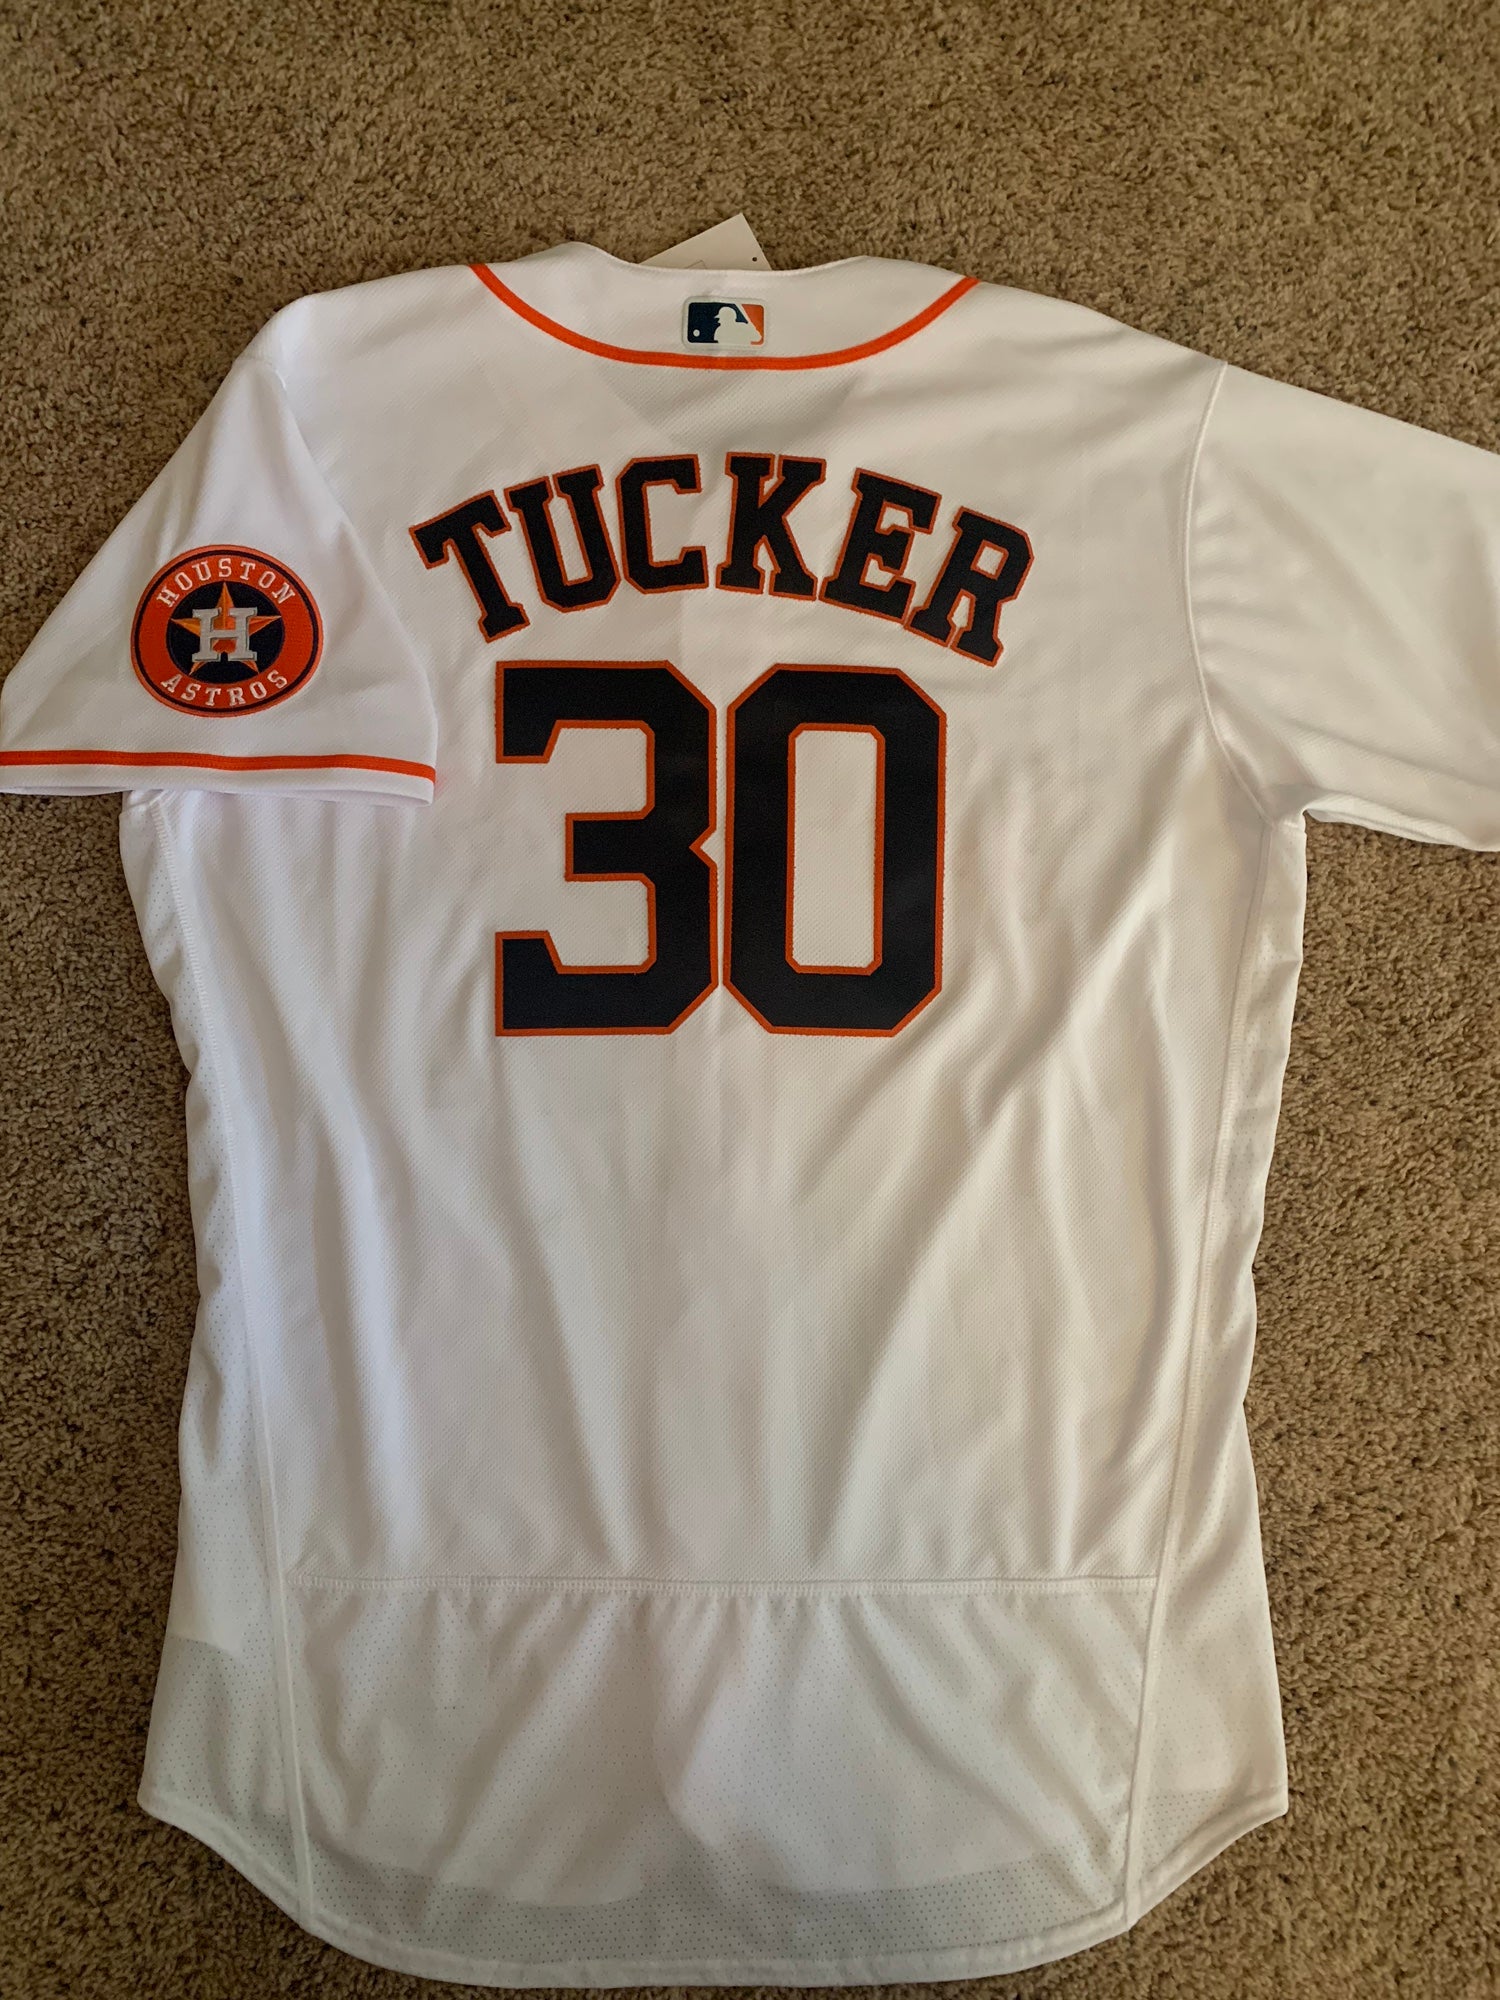 Nike Youth Houston Astros Gold Kyle Tucker Replica Jersey